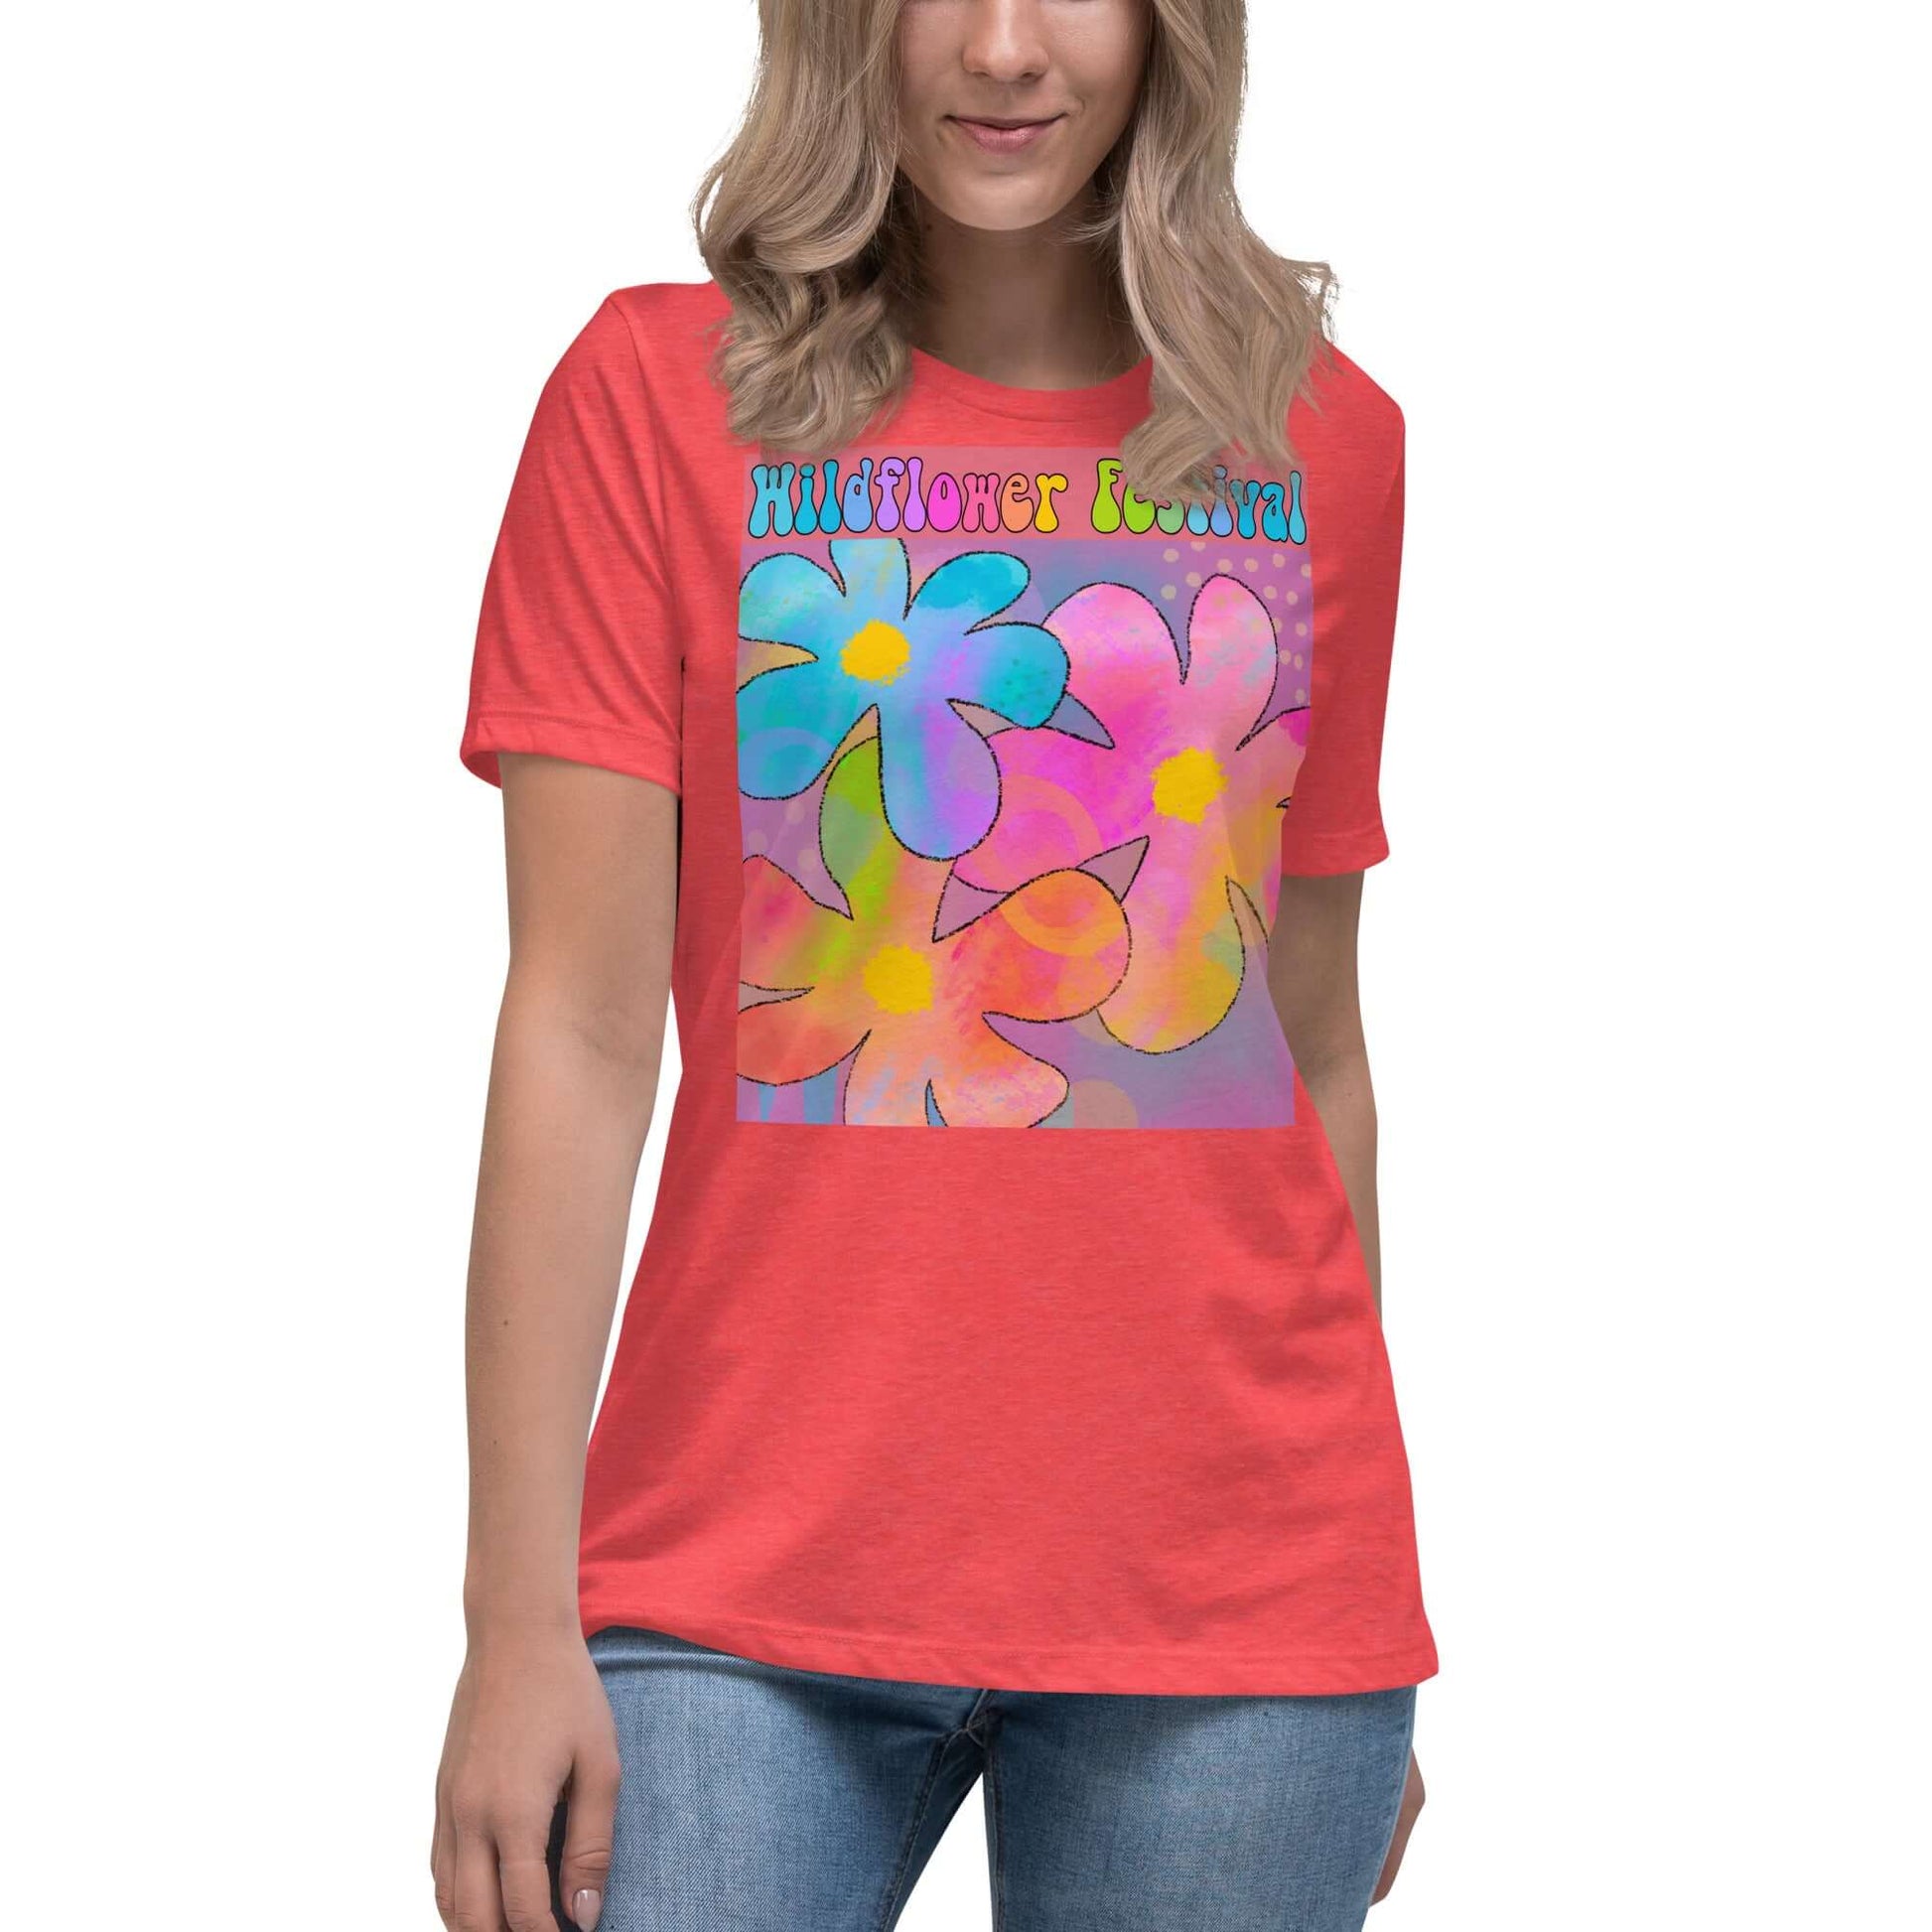 Big Colorful Hippie 1960s Psychedelic Flowers with Text “Wildflower Festival” Women’s Short Sleeve Tee in Heather Red